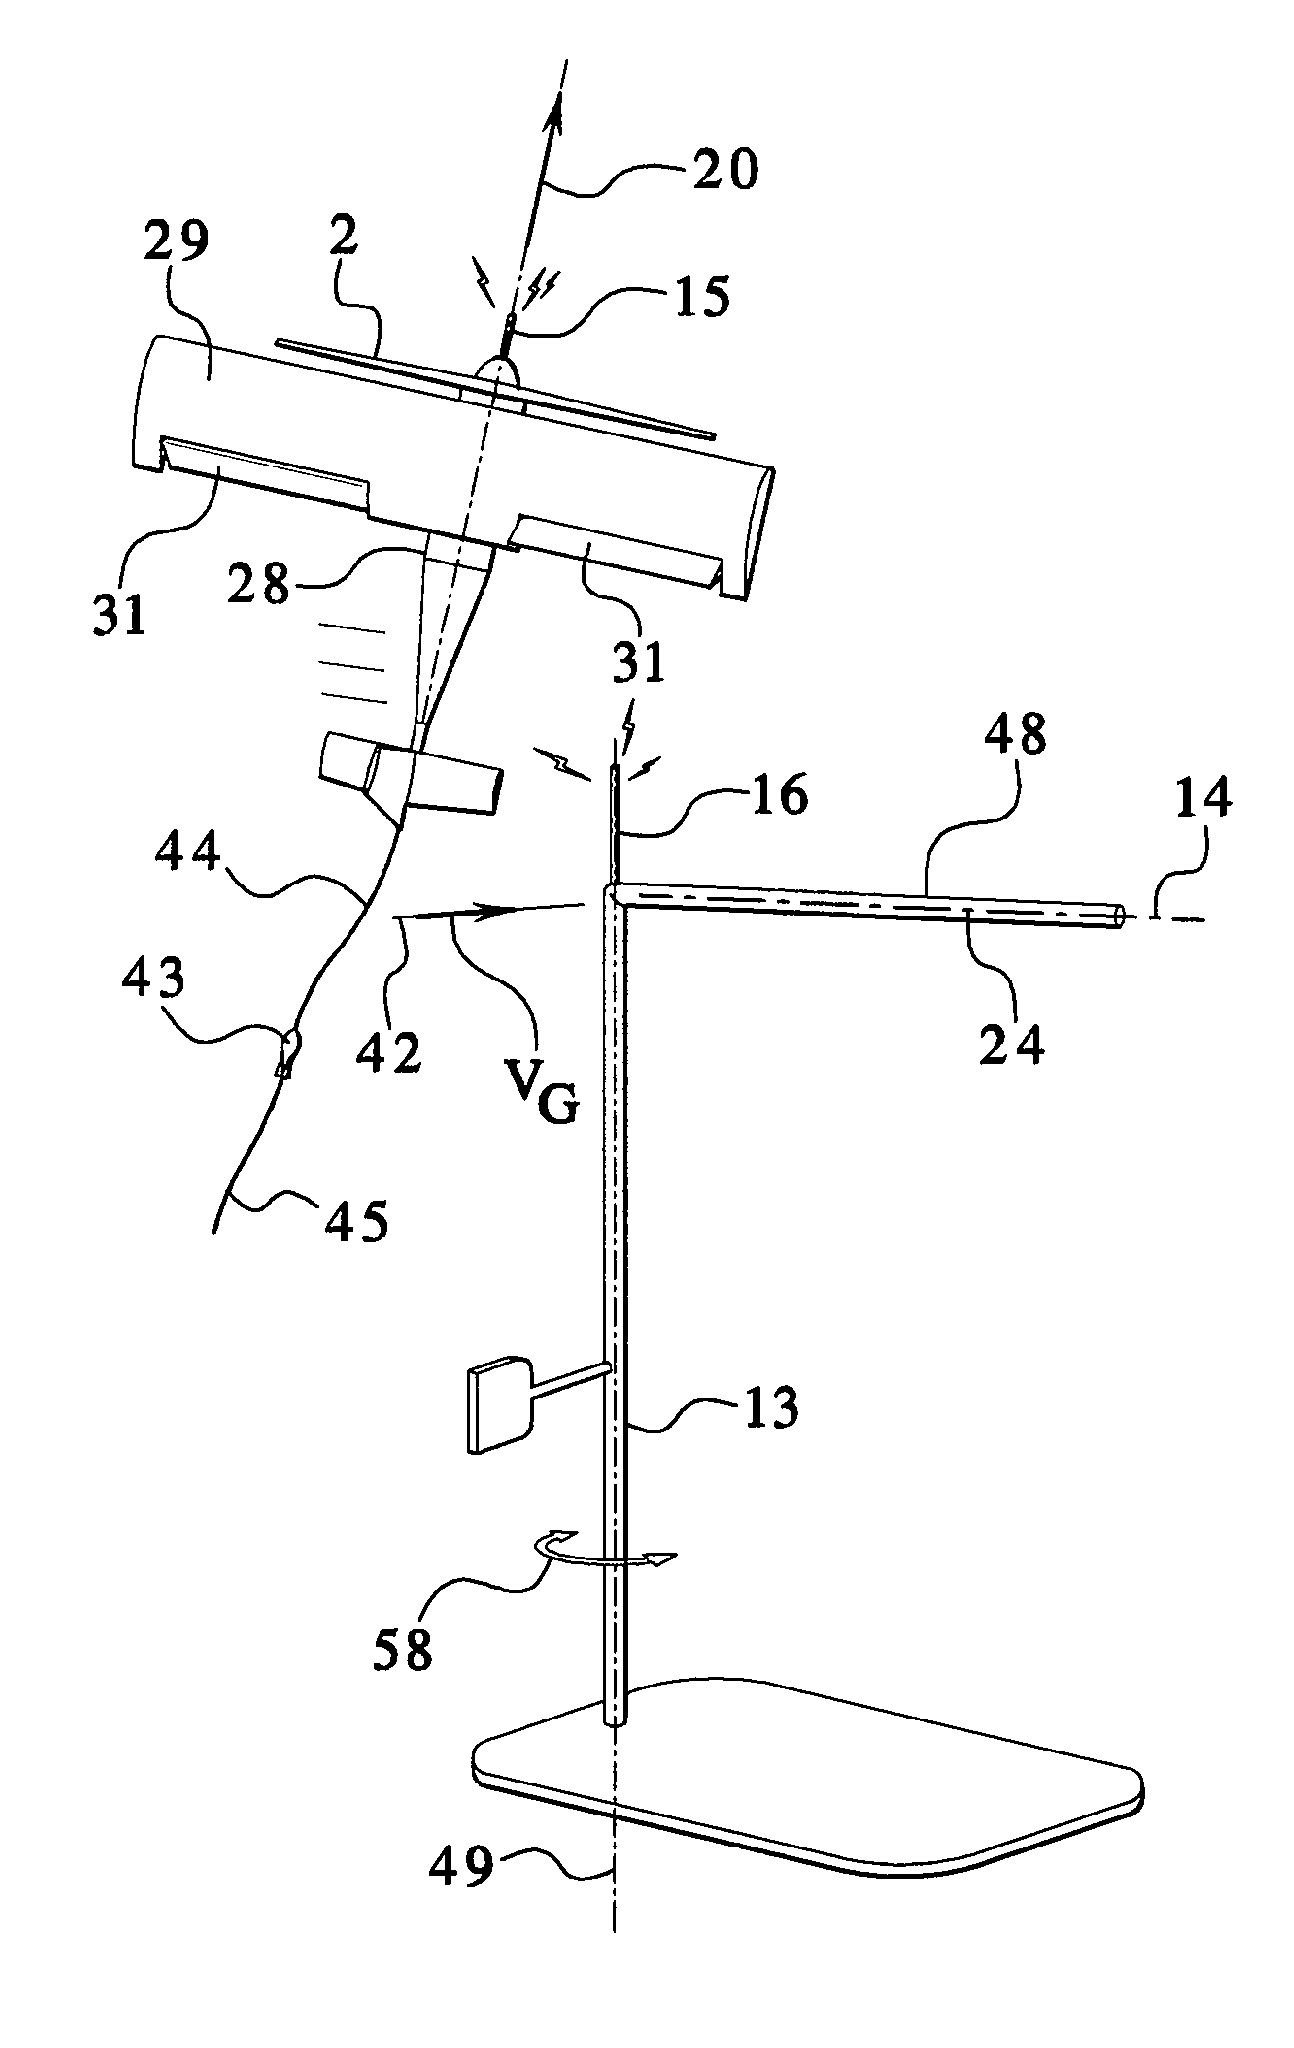 Method and apparatus for retrieving a hovering aircraft